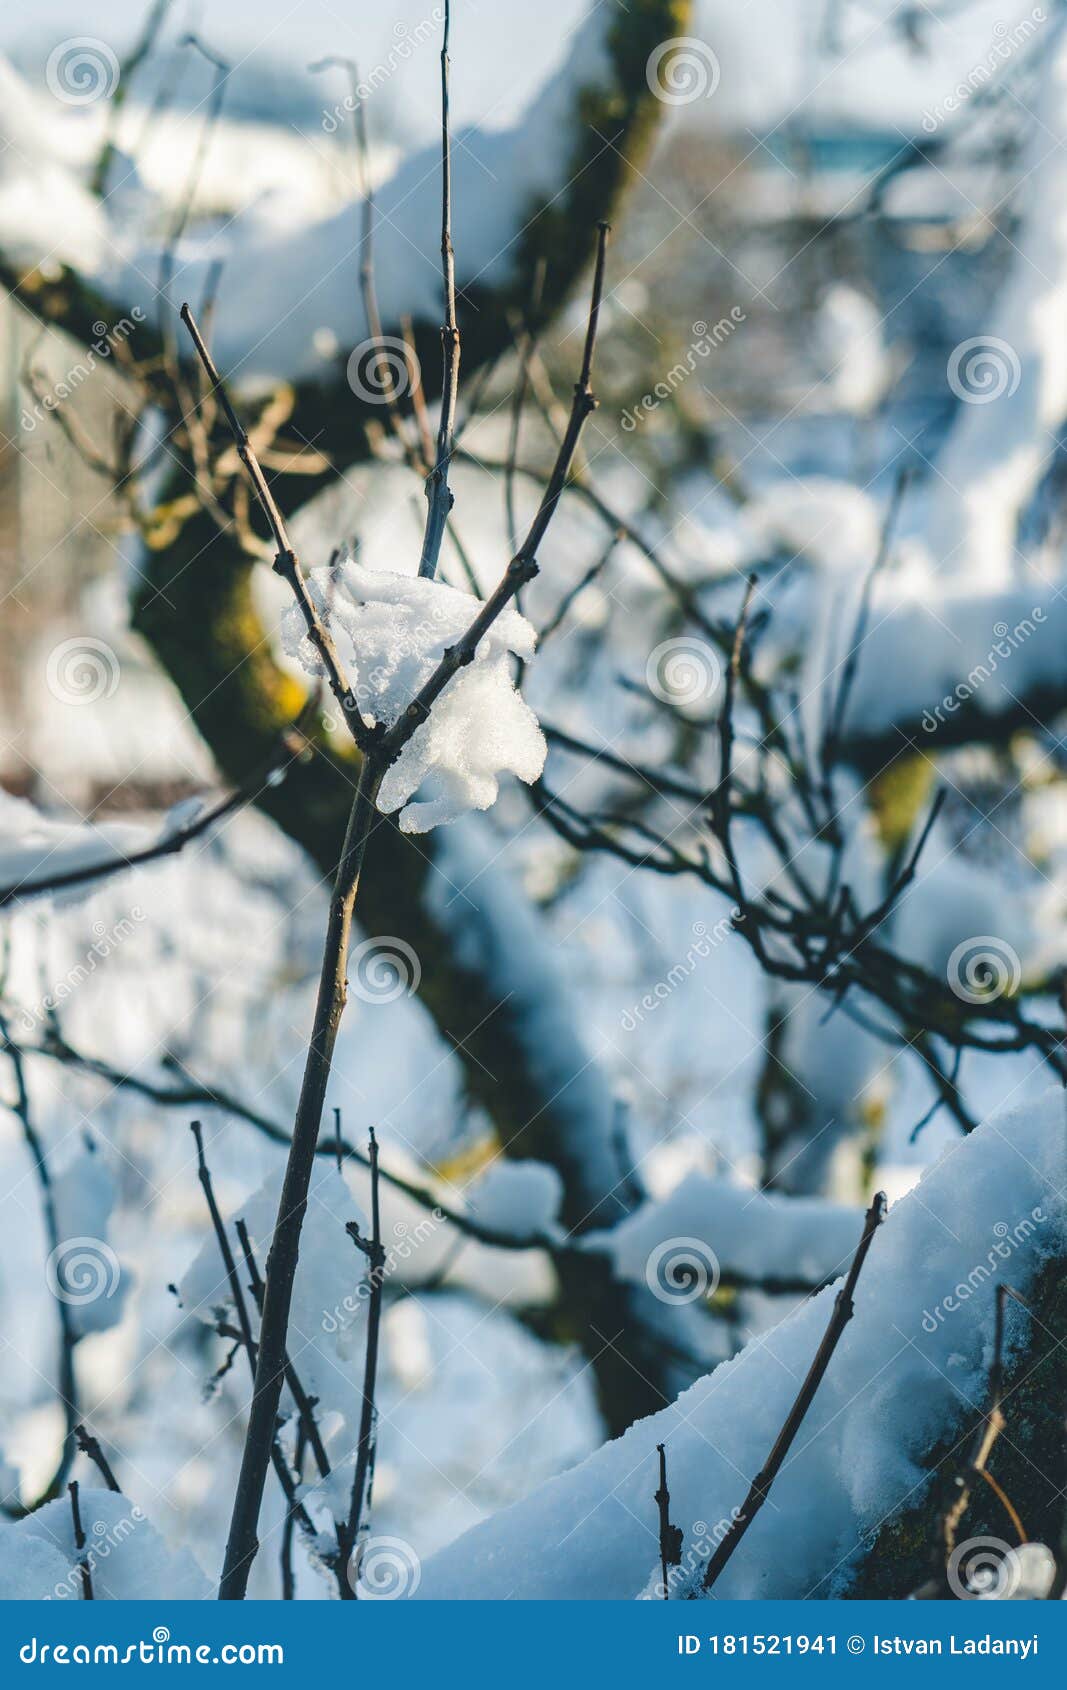 Snow-covered bushes stock image. Image of christmas - 181521941